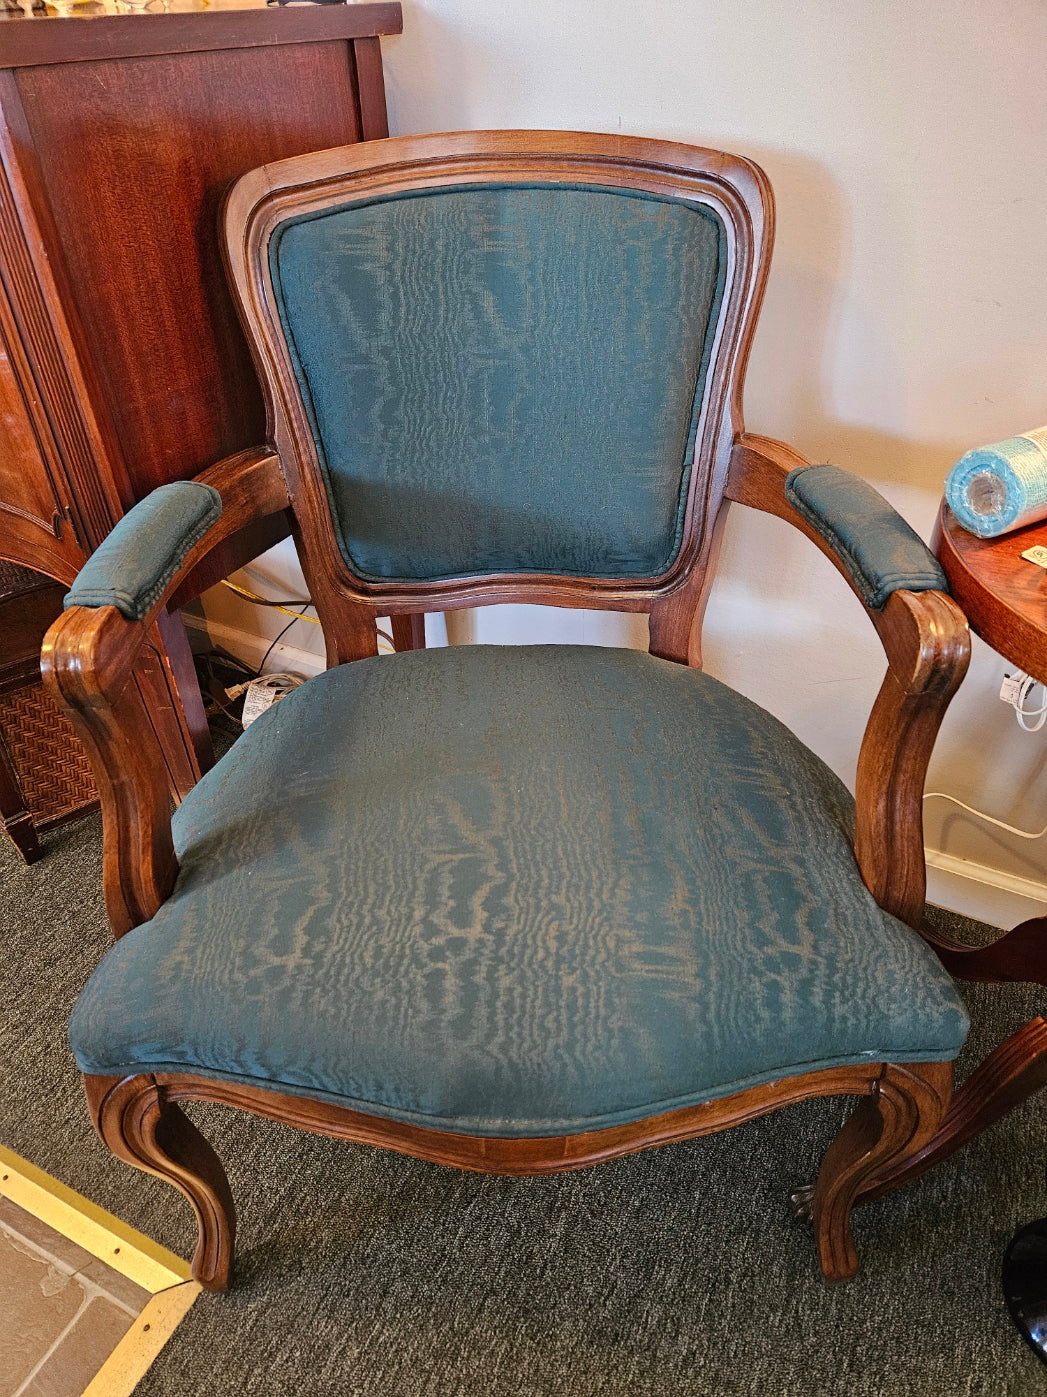 Vintage, Upholstered Am Chair